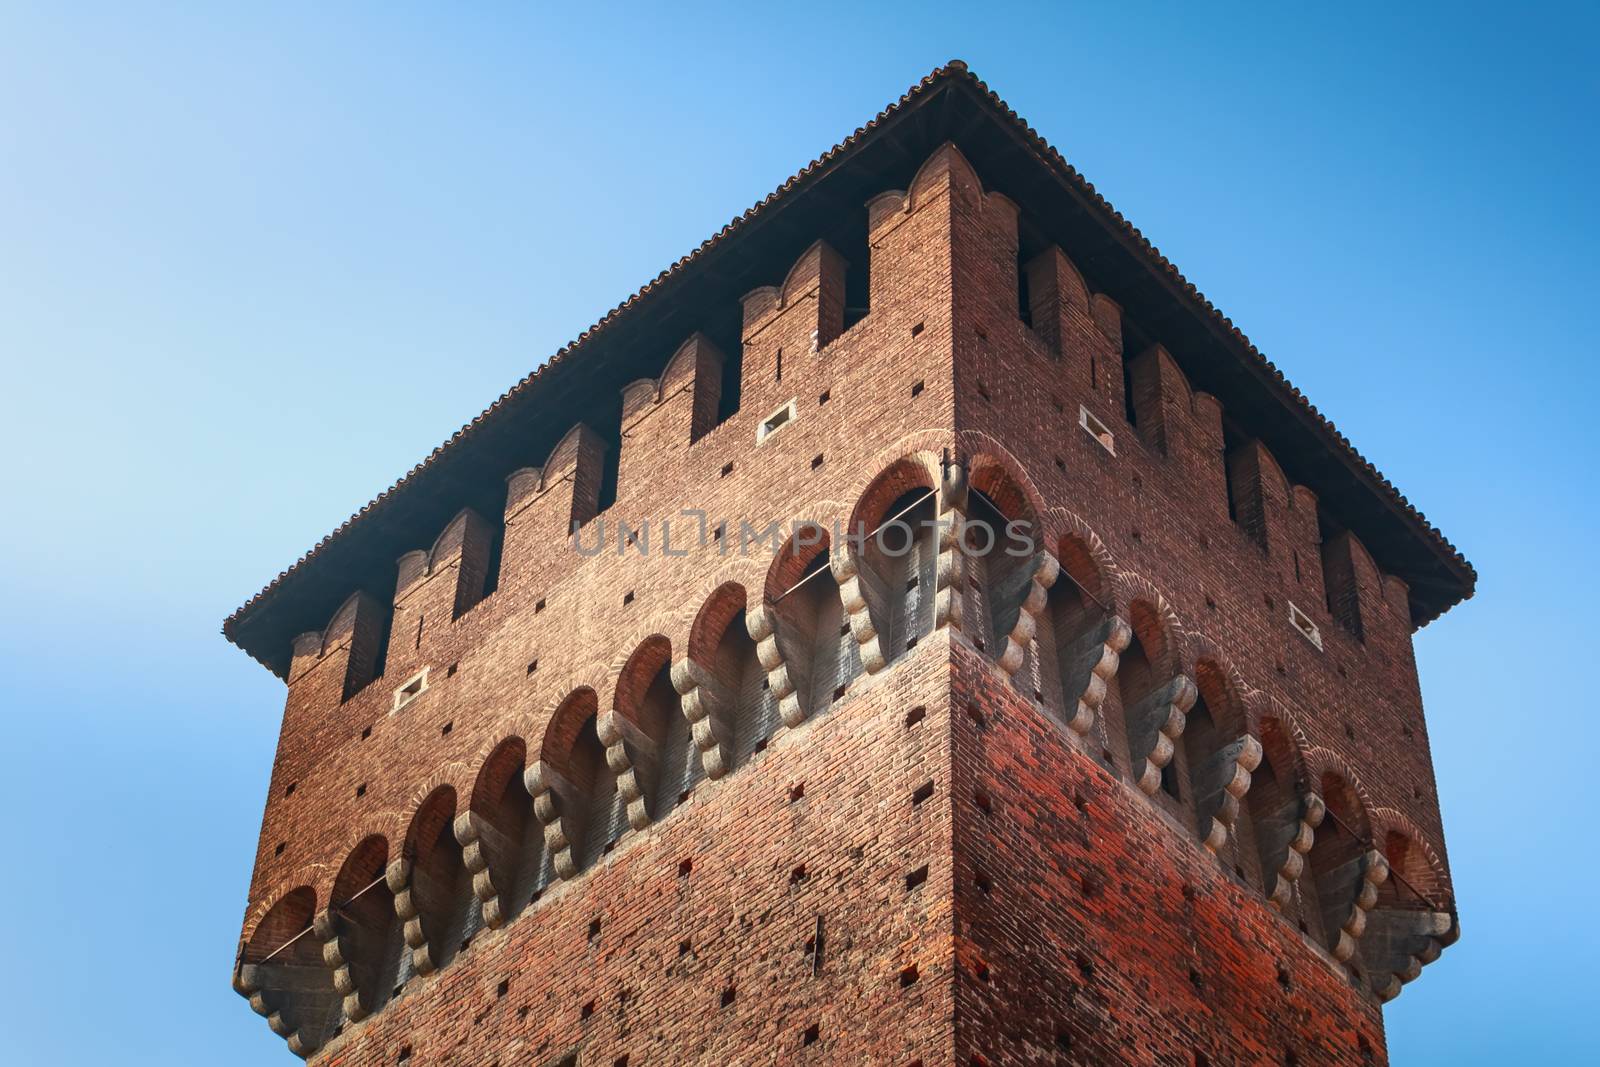 architectural detail of the facade of the Castle of Sforza by AtlanticEUROSTOXX